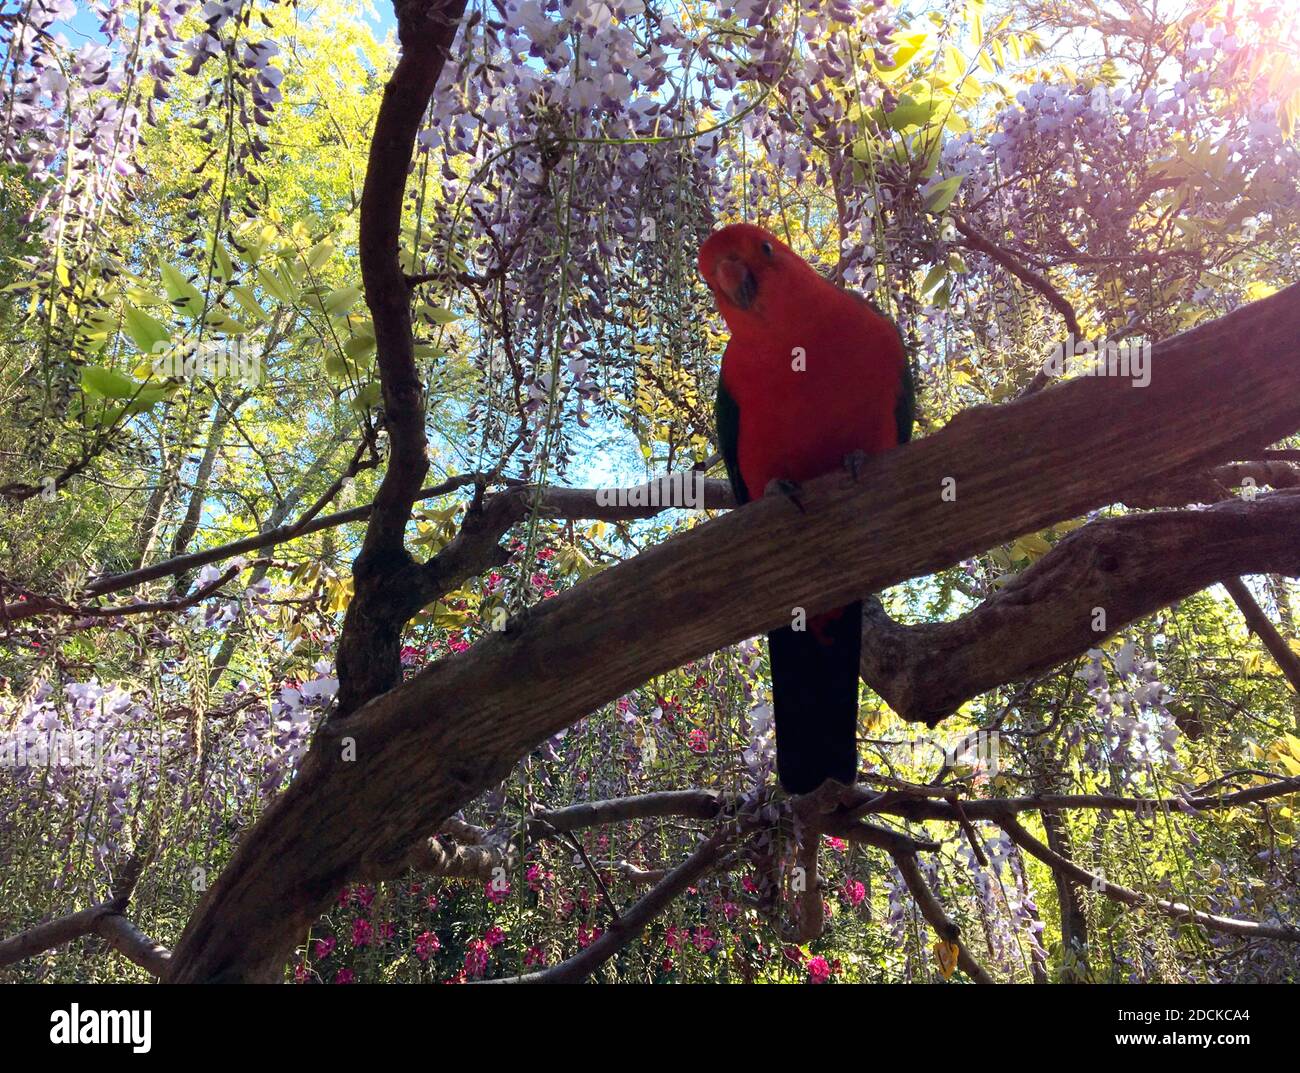 Male King Parrot perched on a branch of flowering mauve wisteria, NSW, Australia Stock Photo